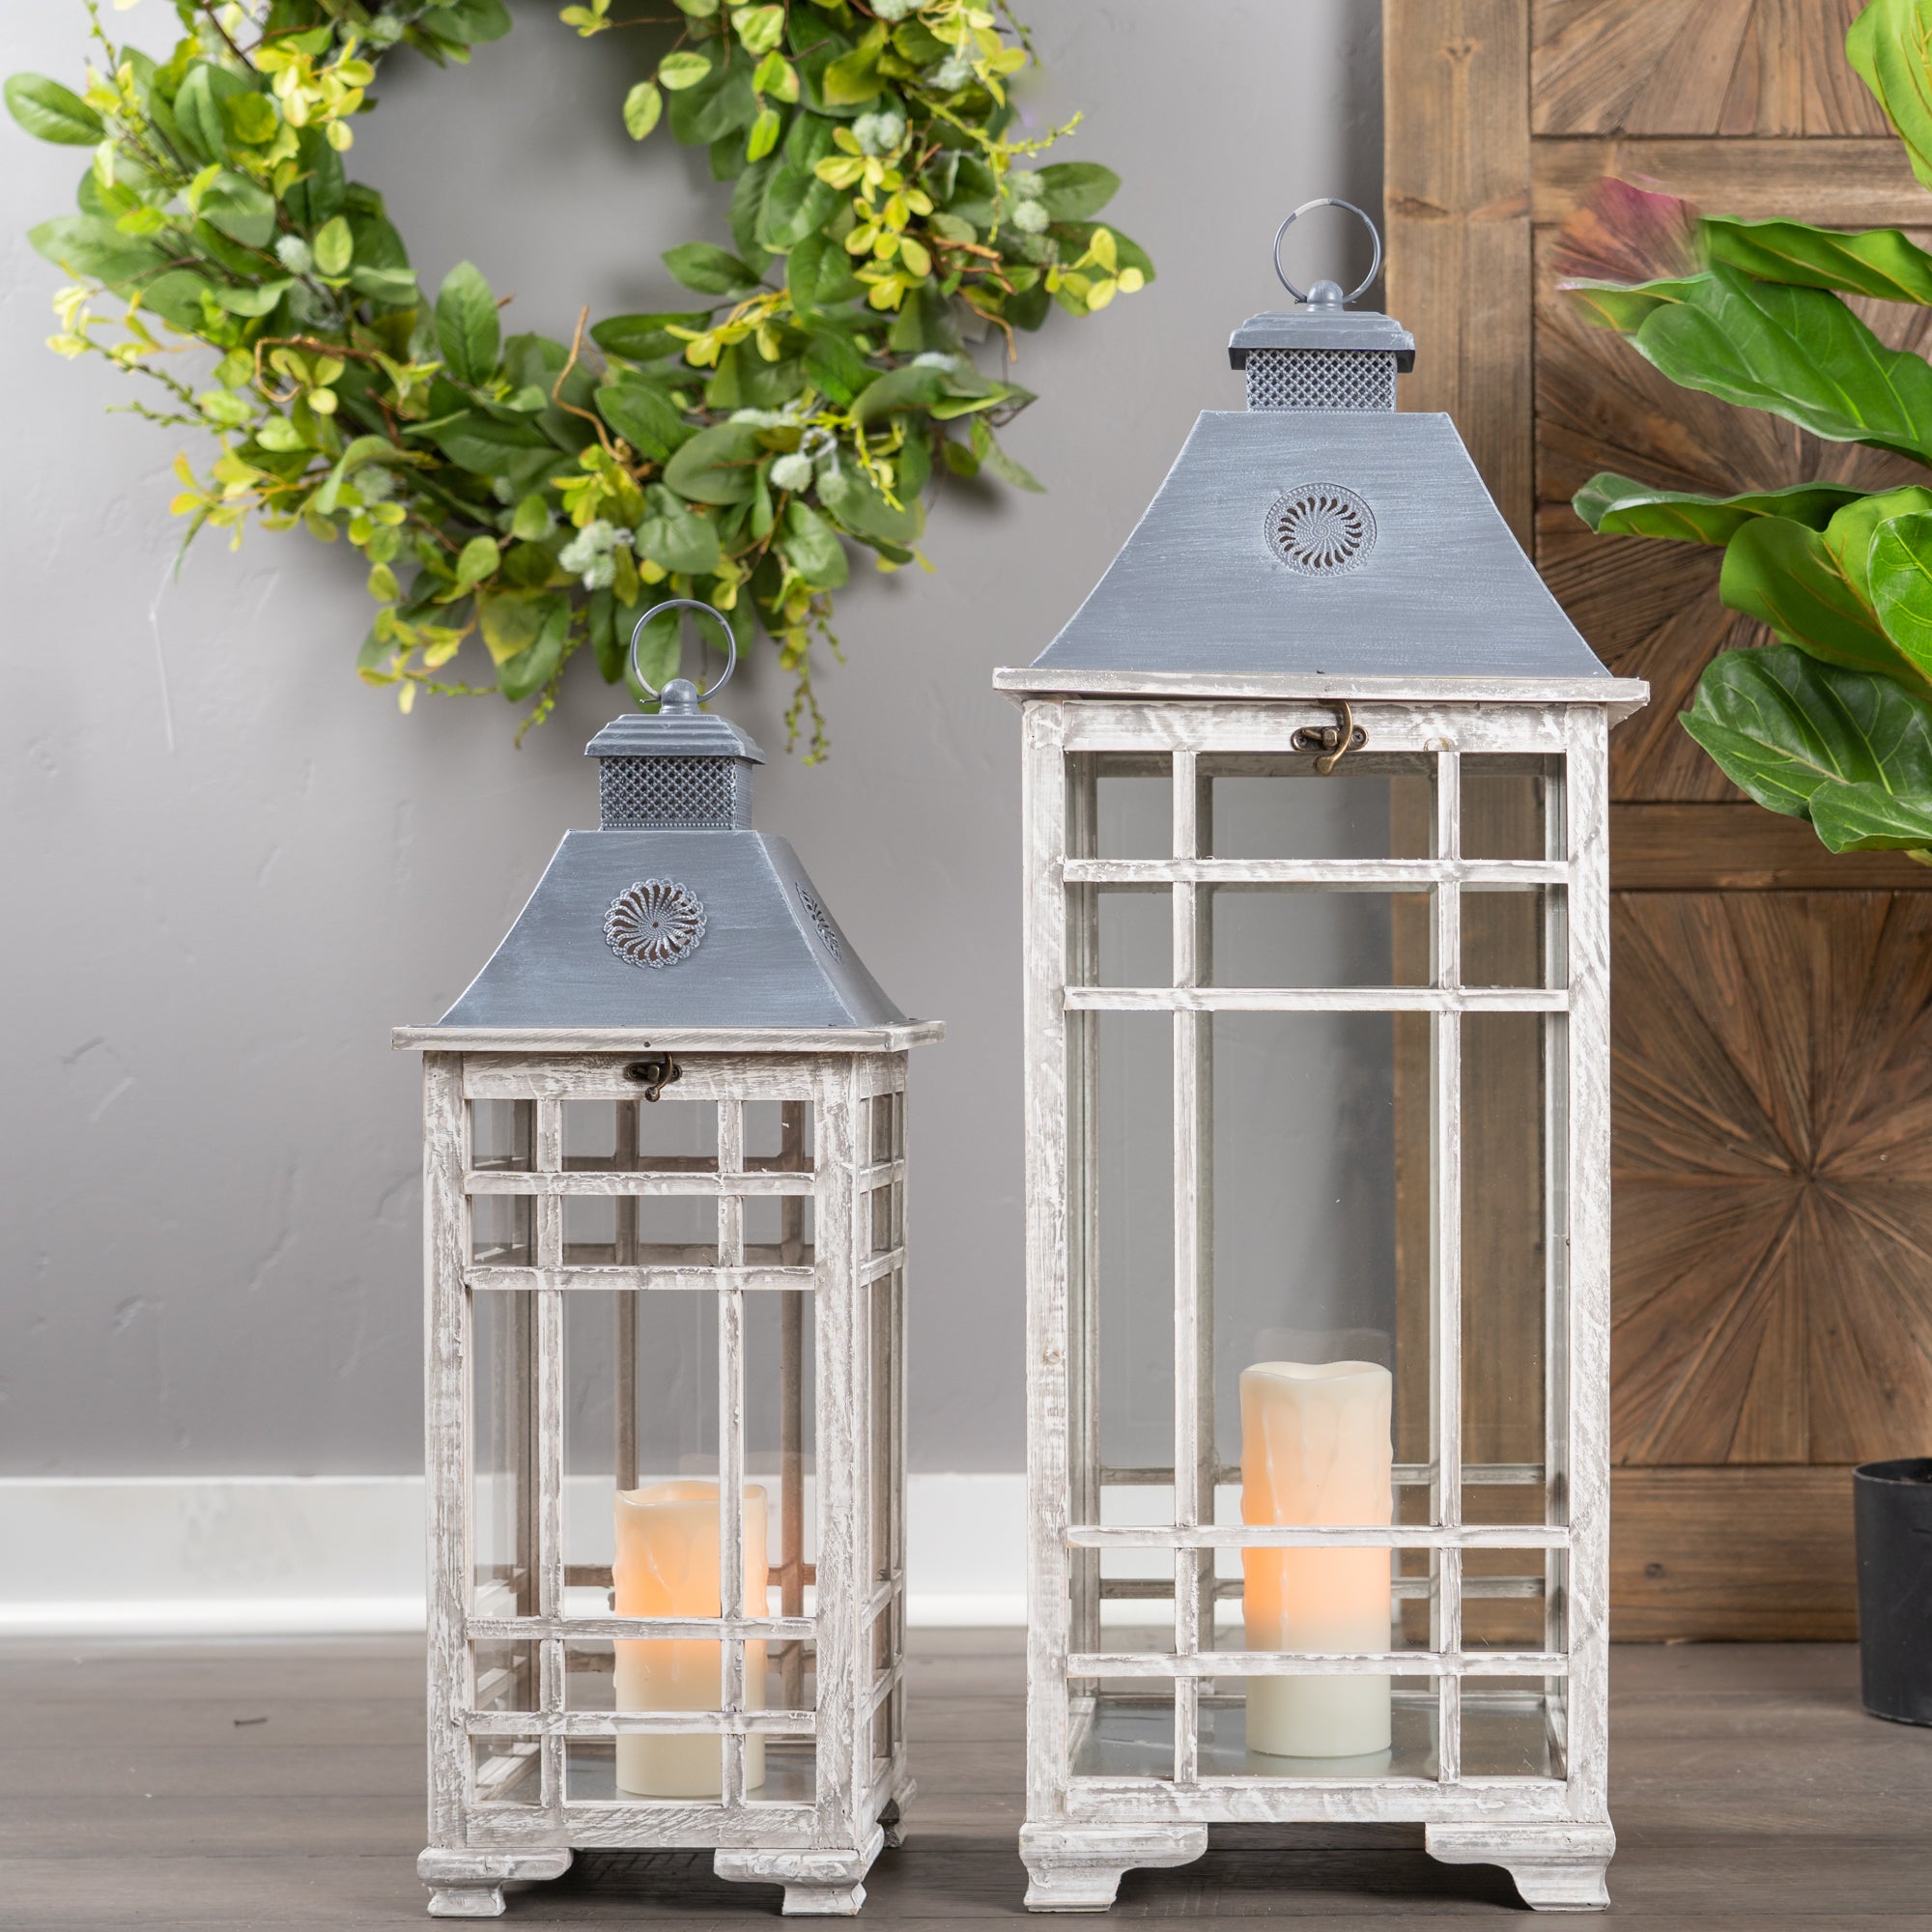 Set Of Two Gray Flameless Lantern Candle Holders